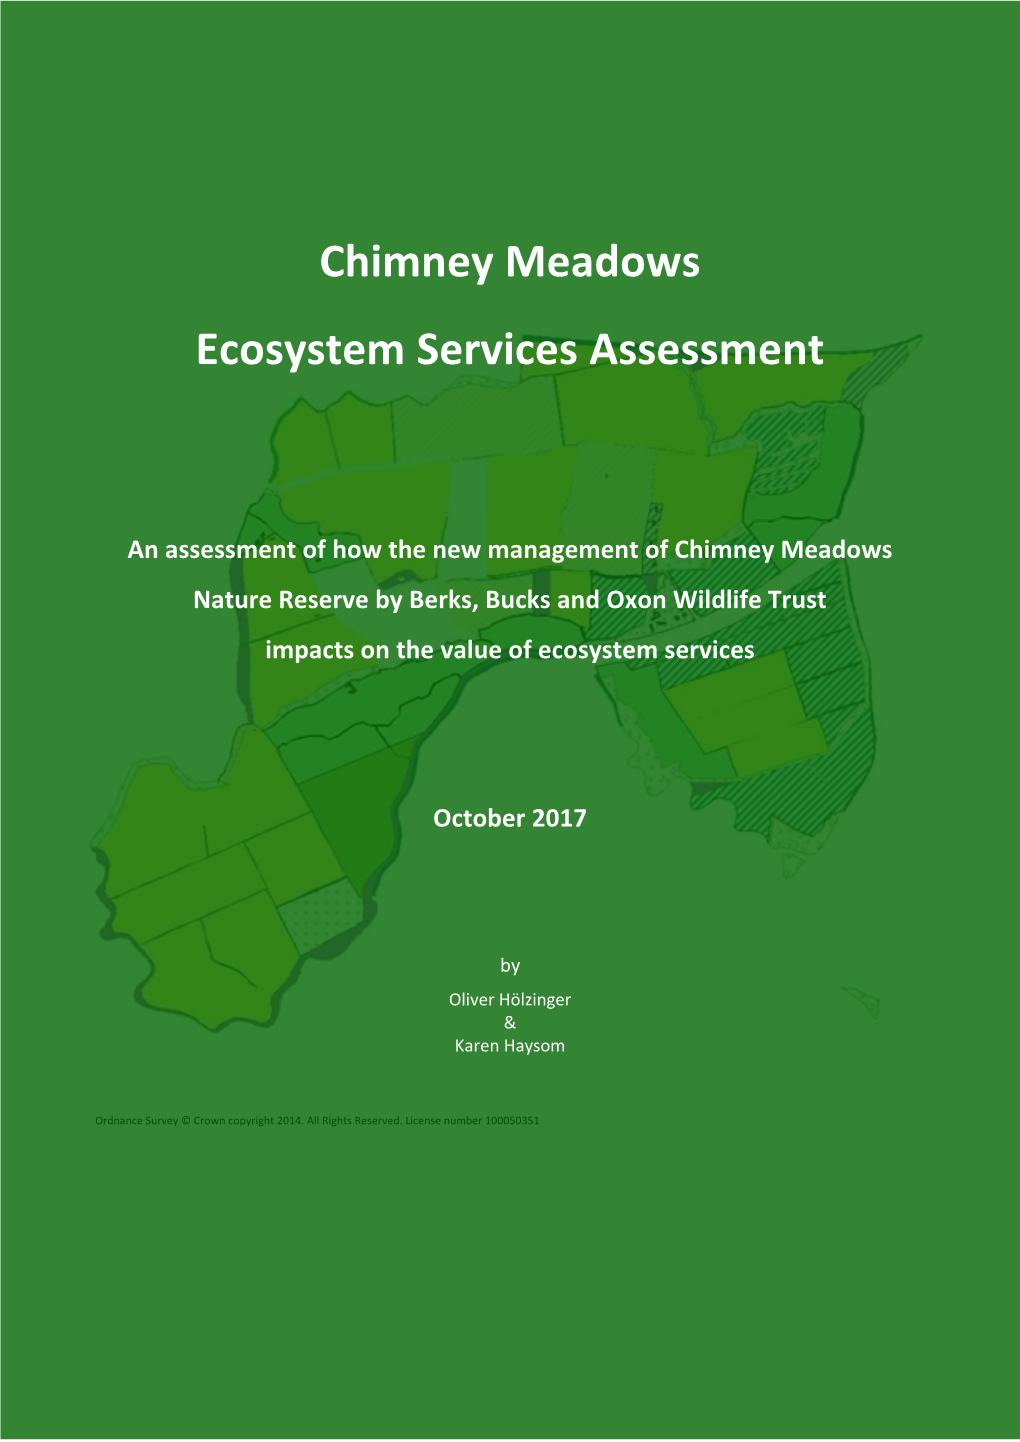 Chimney Meadows Ecosystem Services Assessment 2017